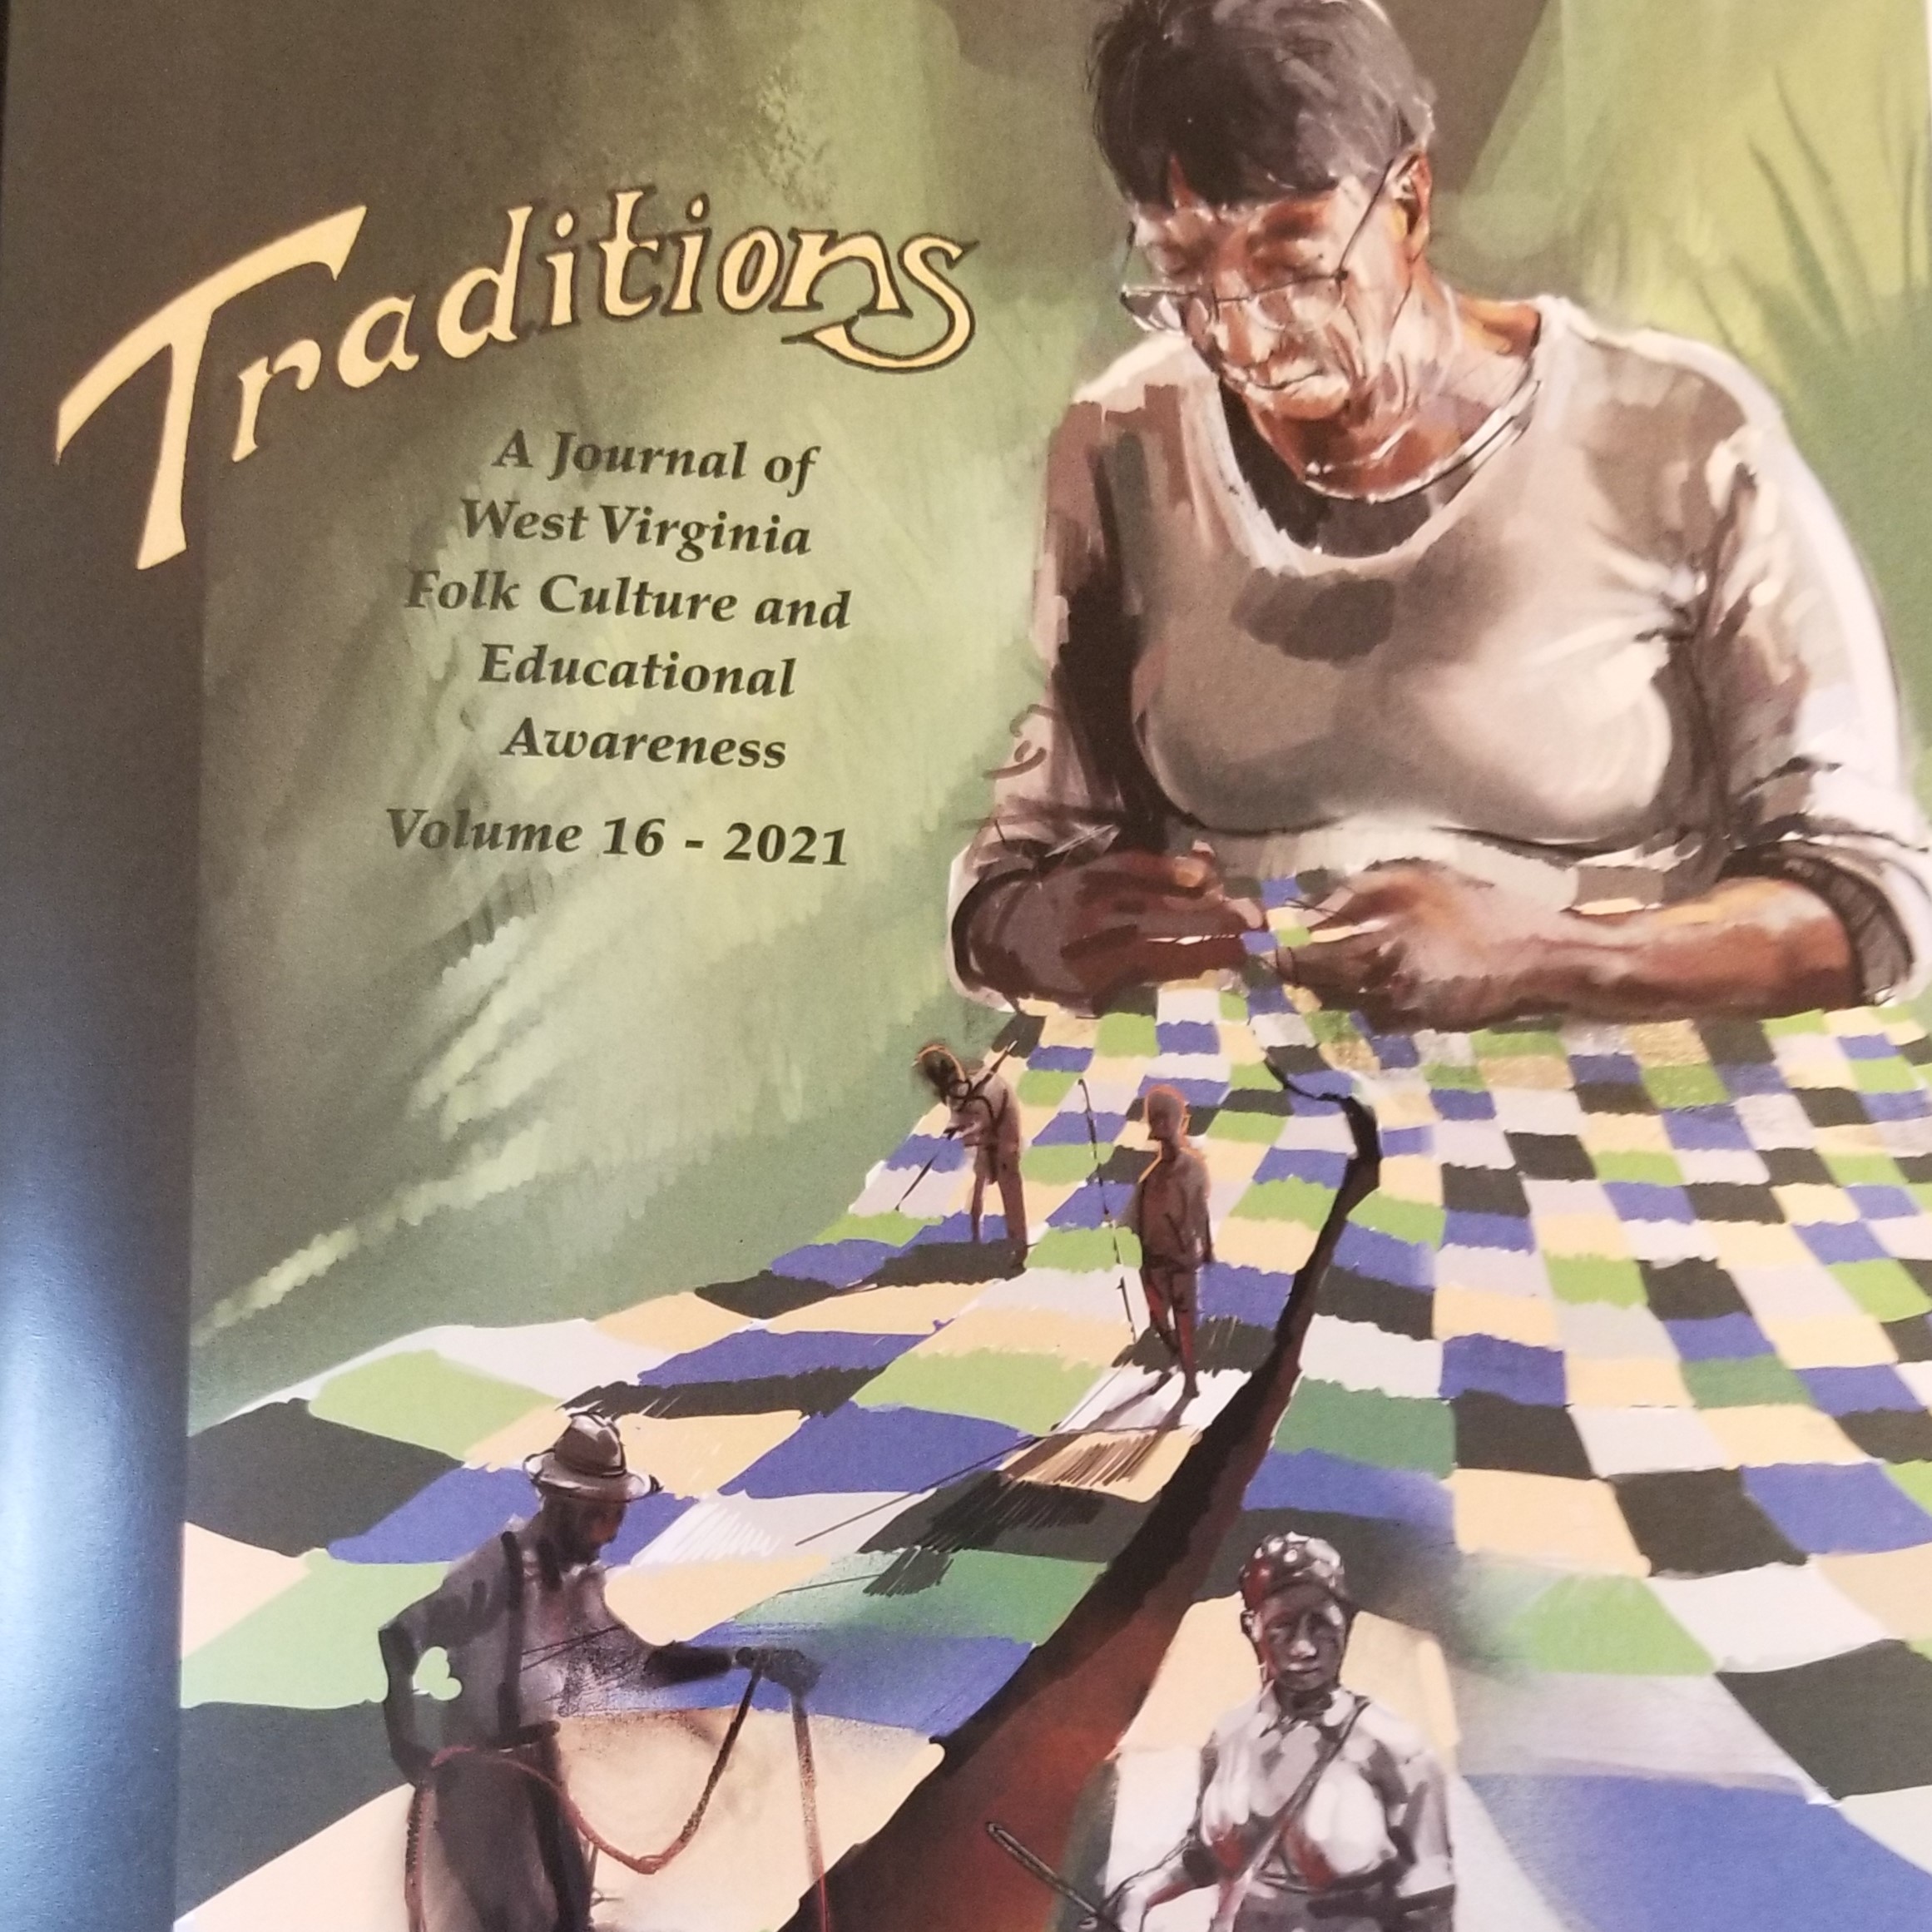 book cover featuring a woman quilting